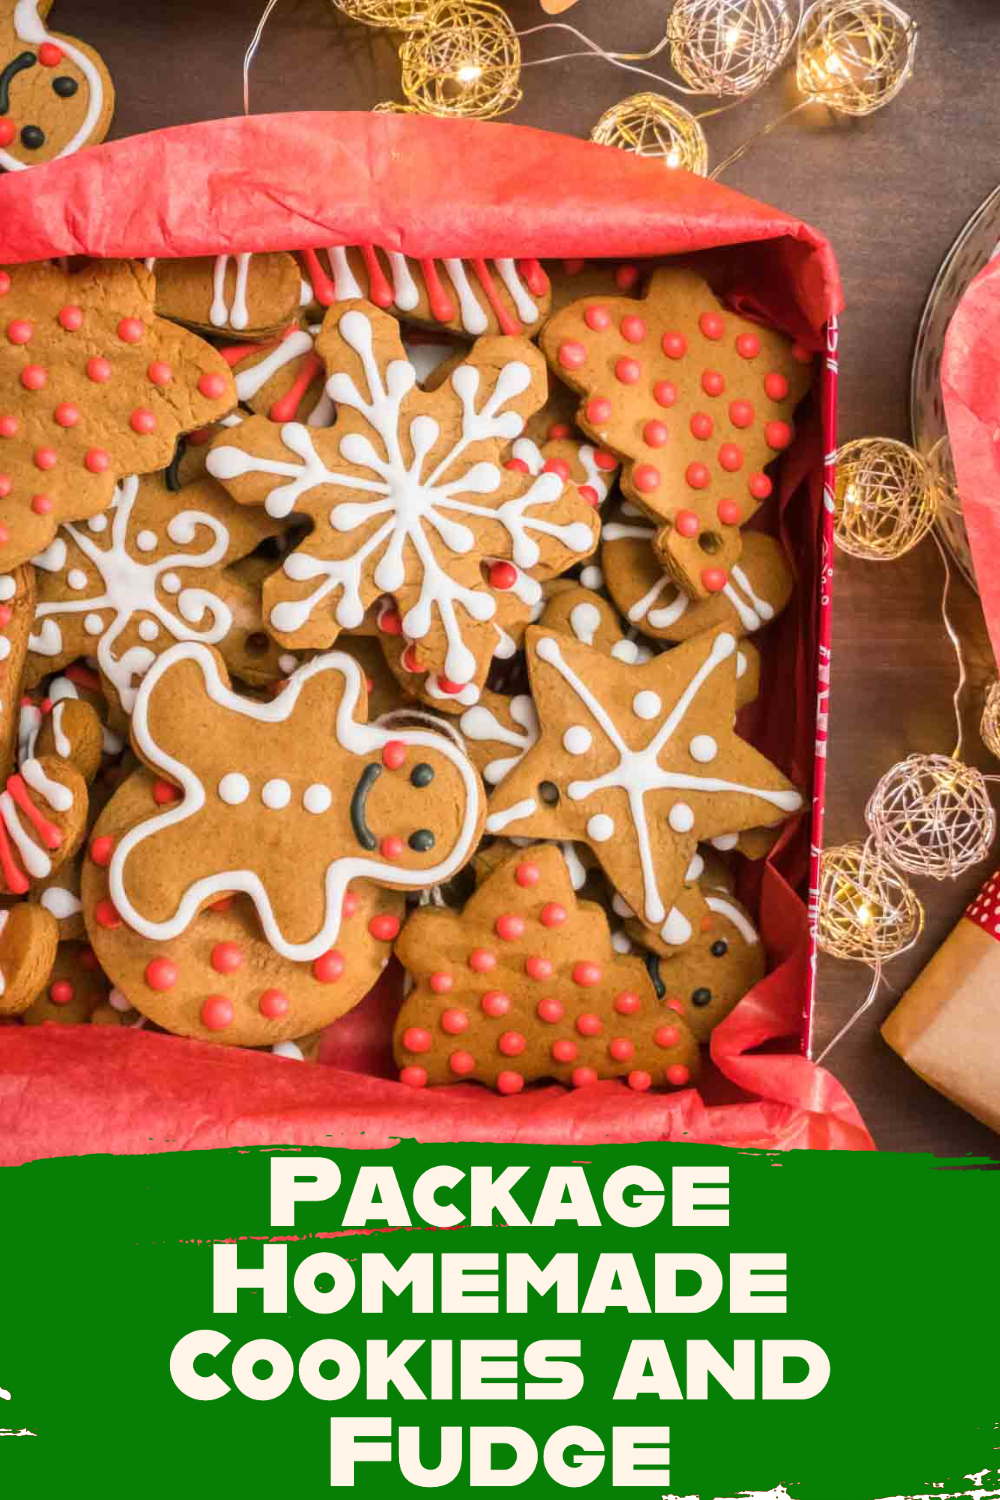 Package Homemade Cookies and Fudge